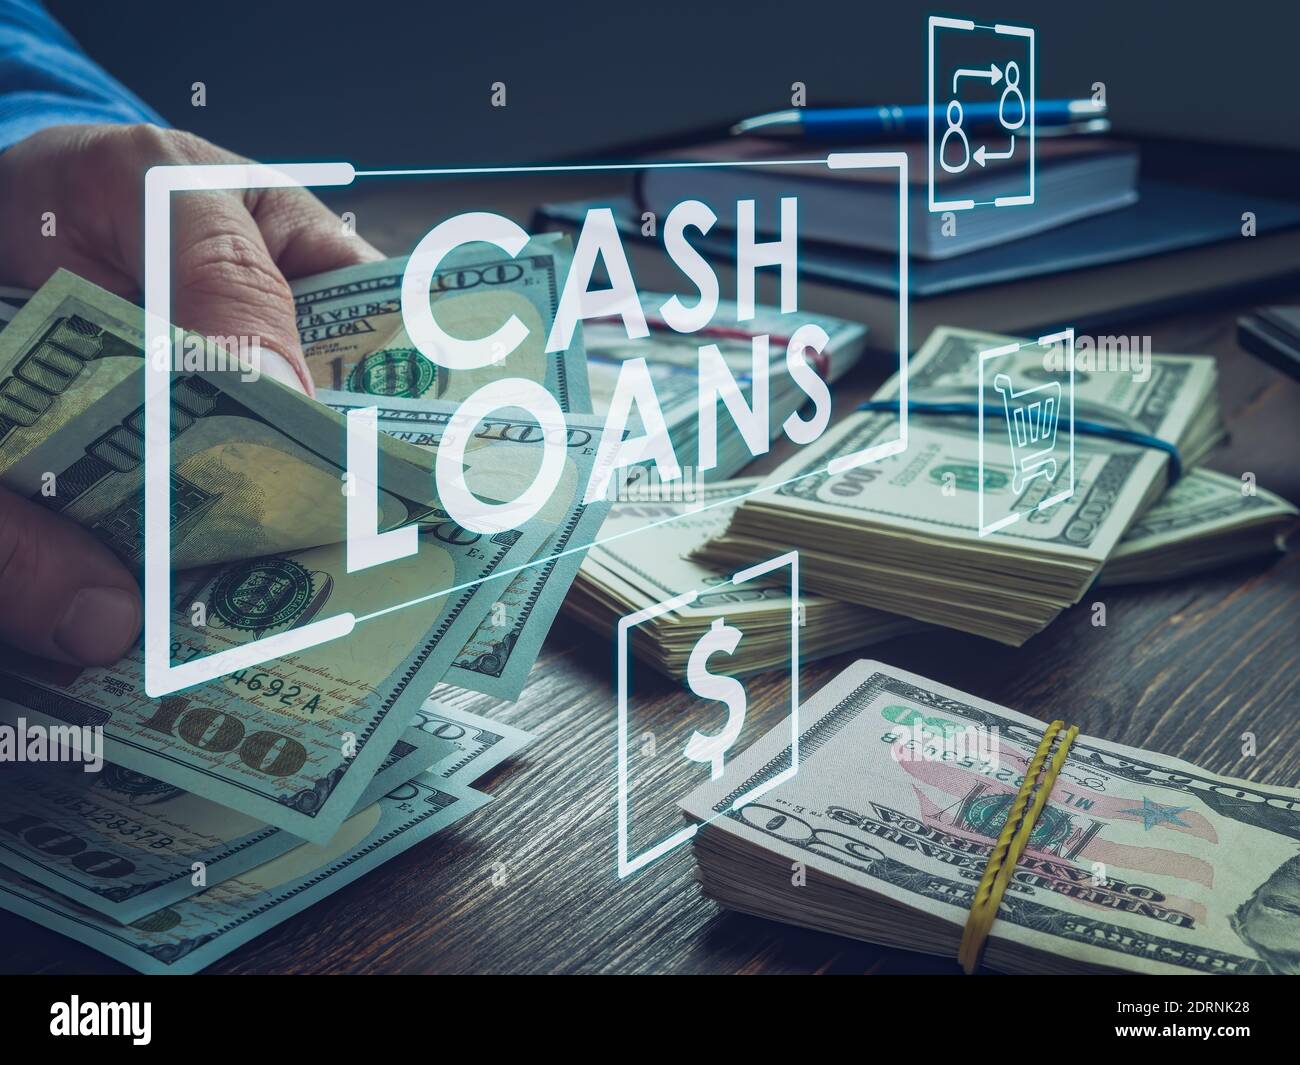 Online cash loans concept. Hands counting money. Stock Photo